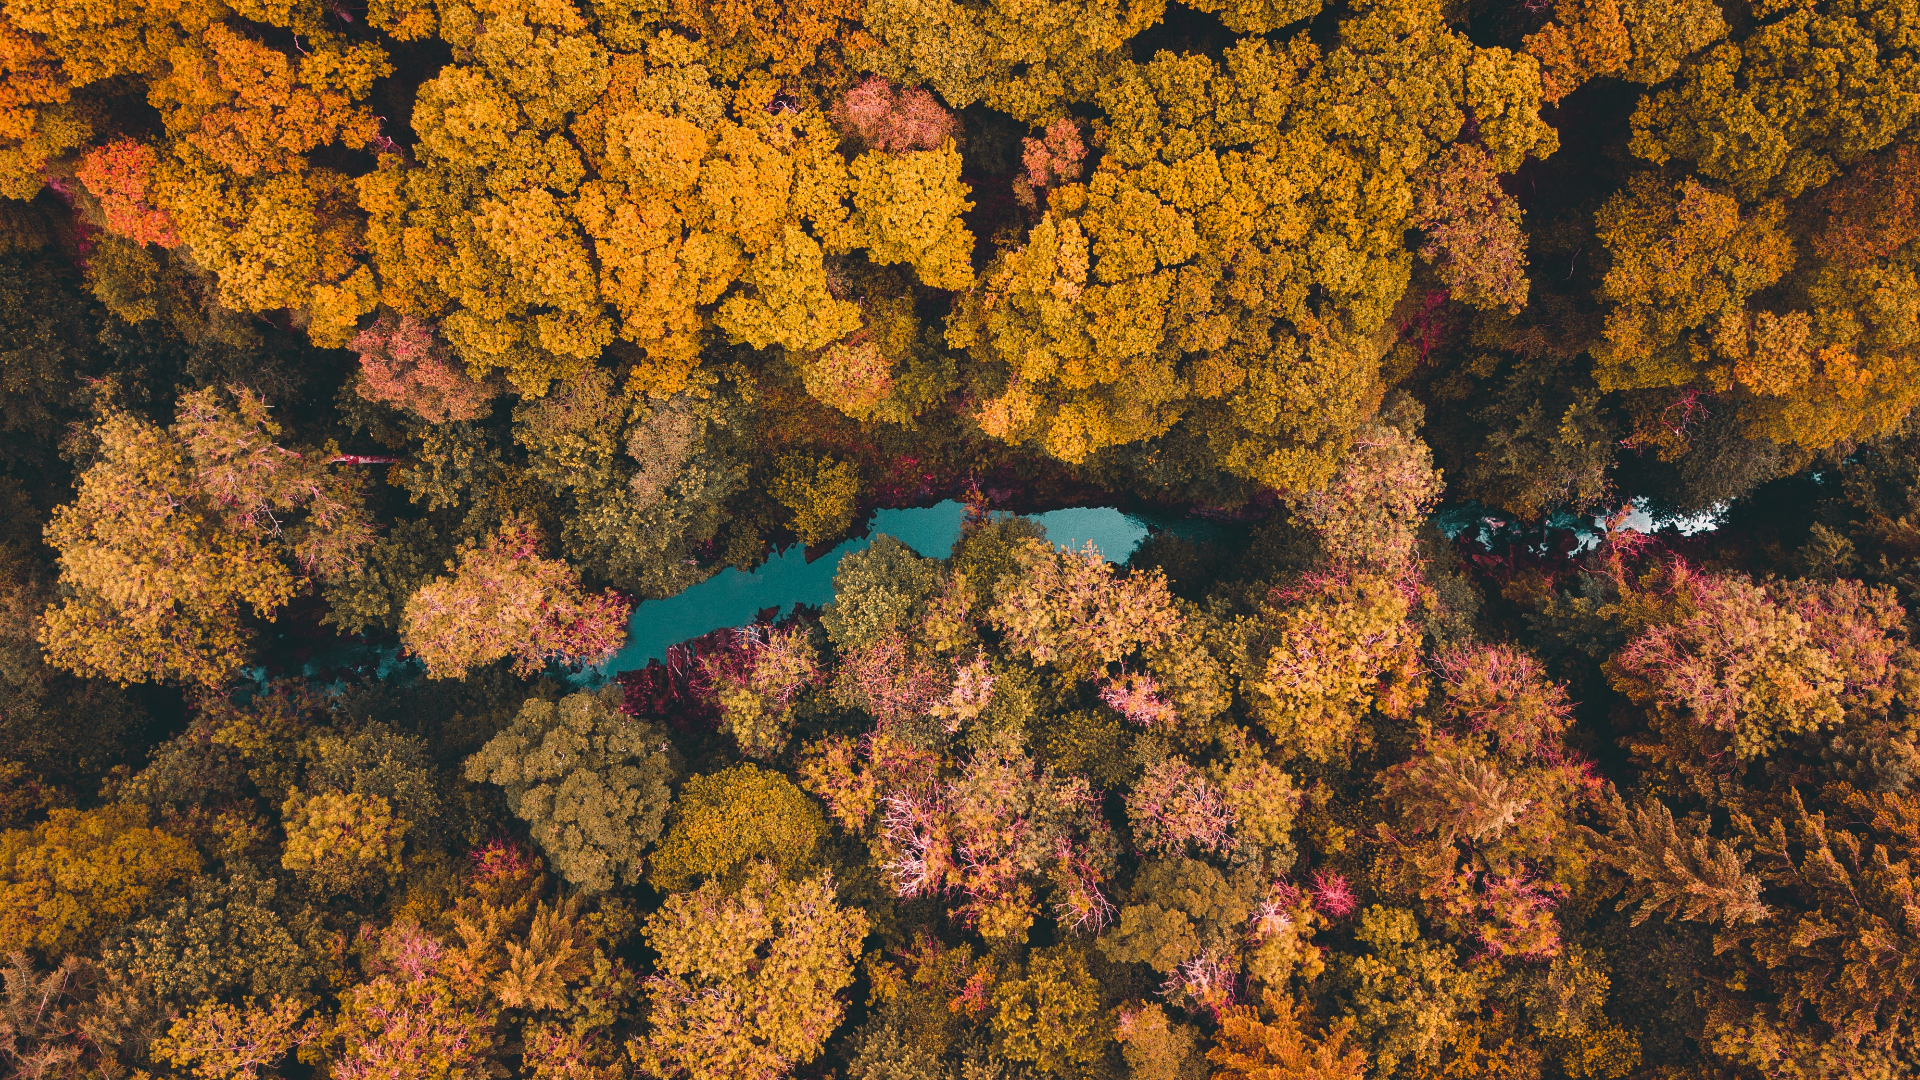 General 1920x1080 nature trees forest river aerial view drone photo fall